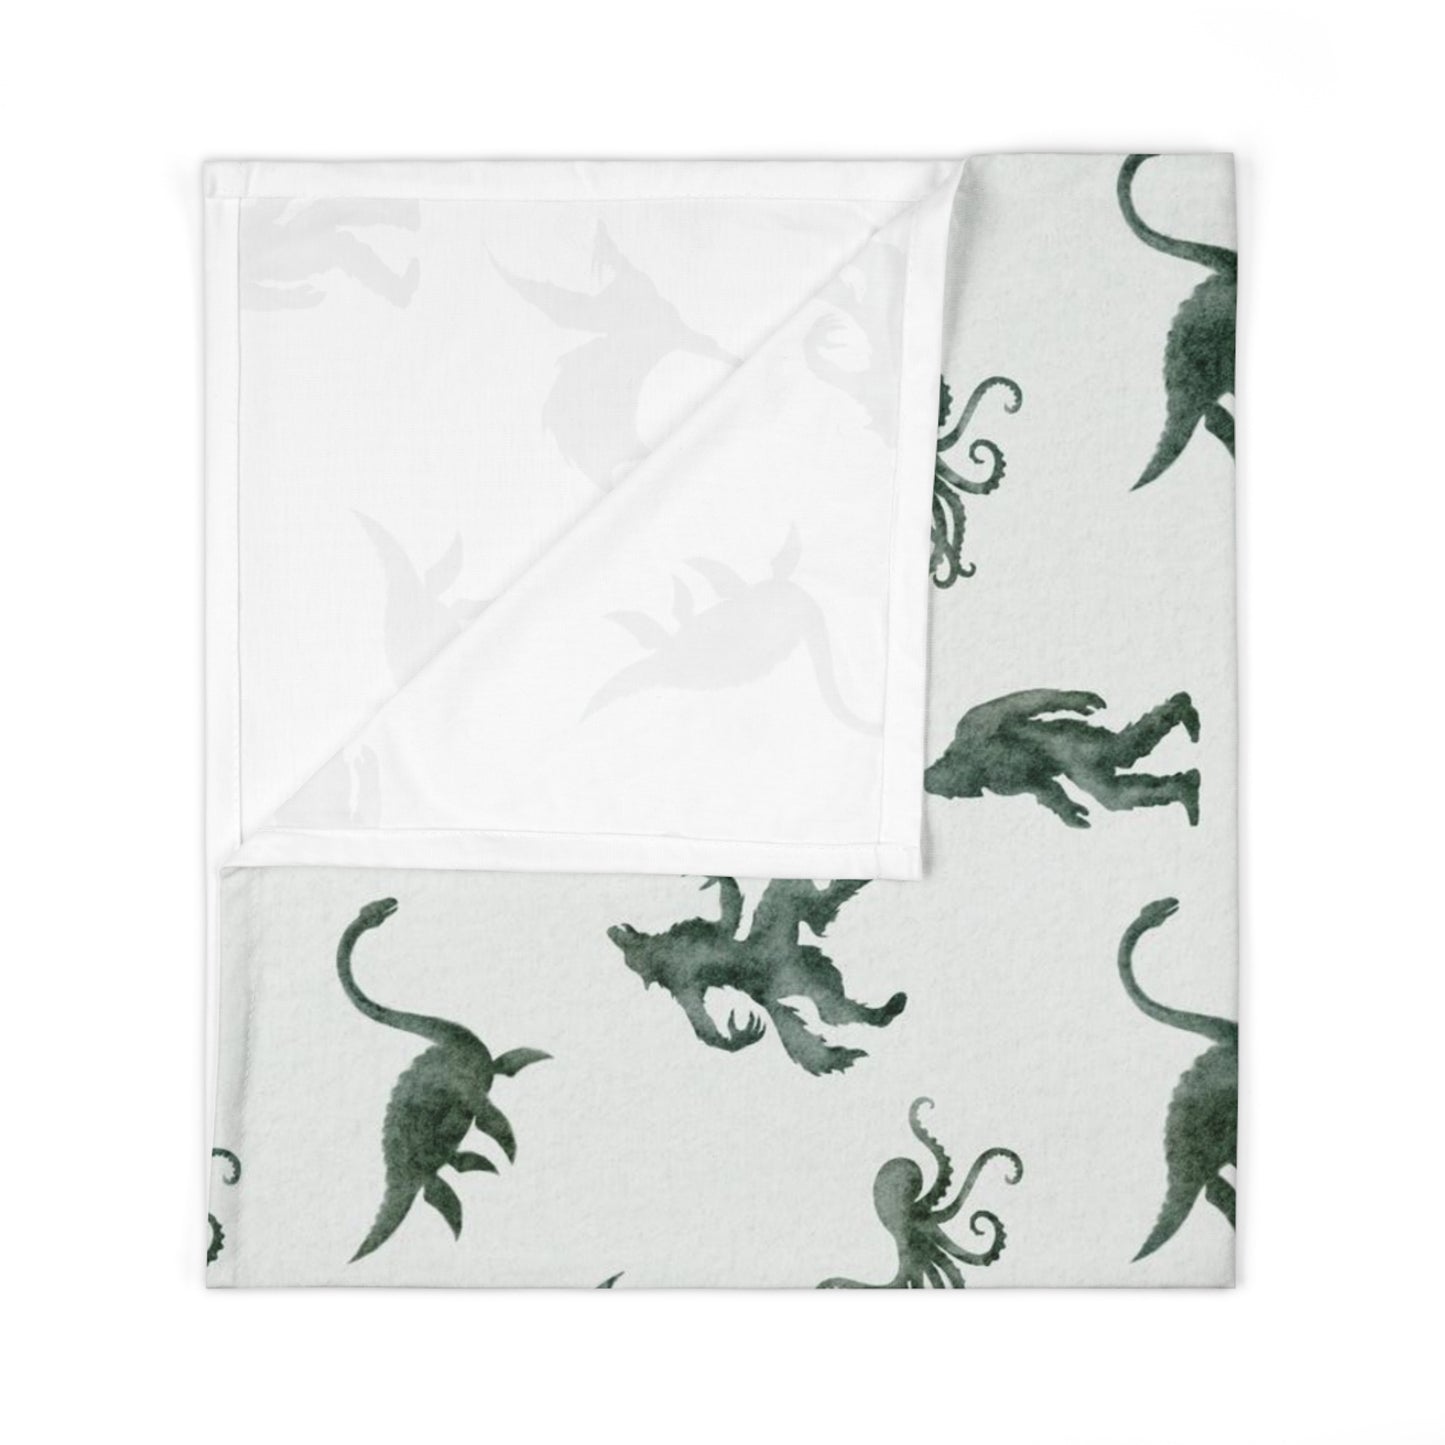 Mythical Creatures Baby Swaddle Blanket